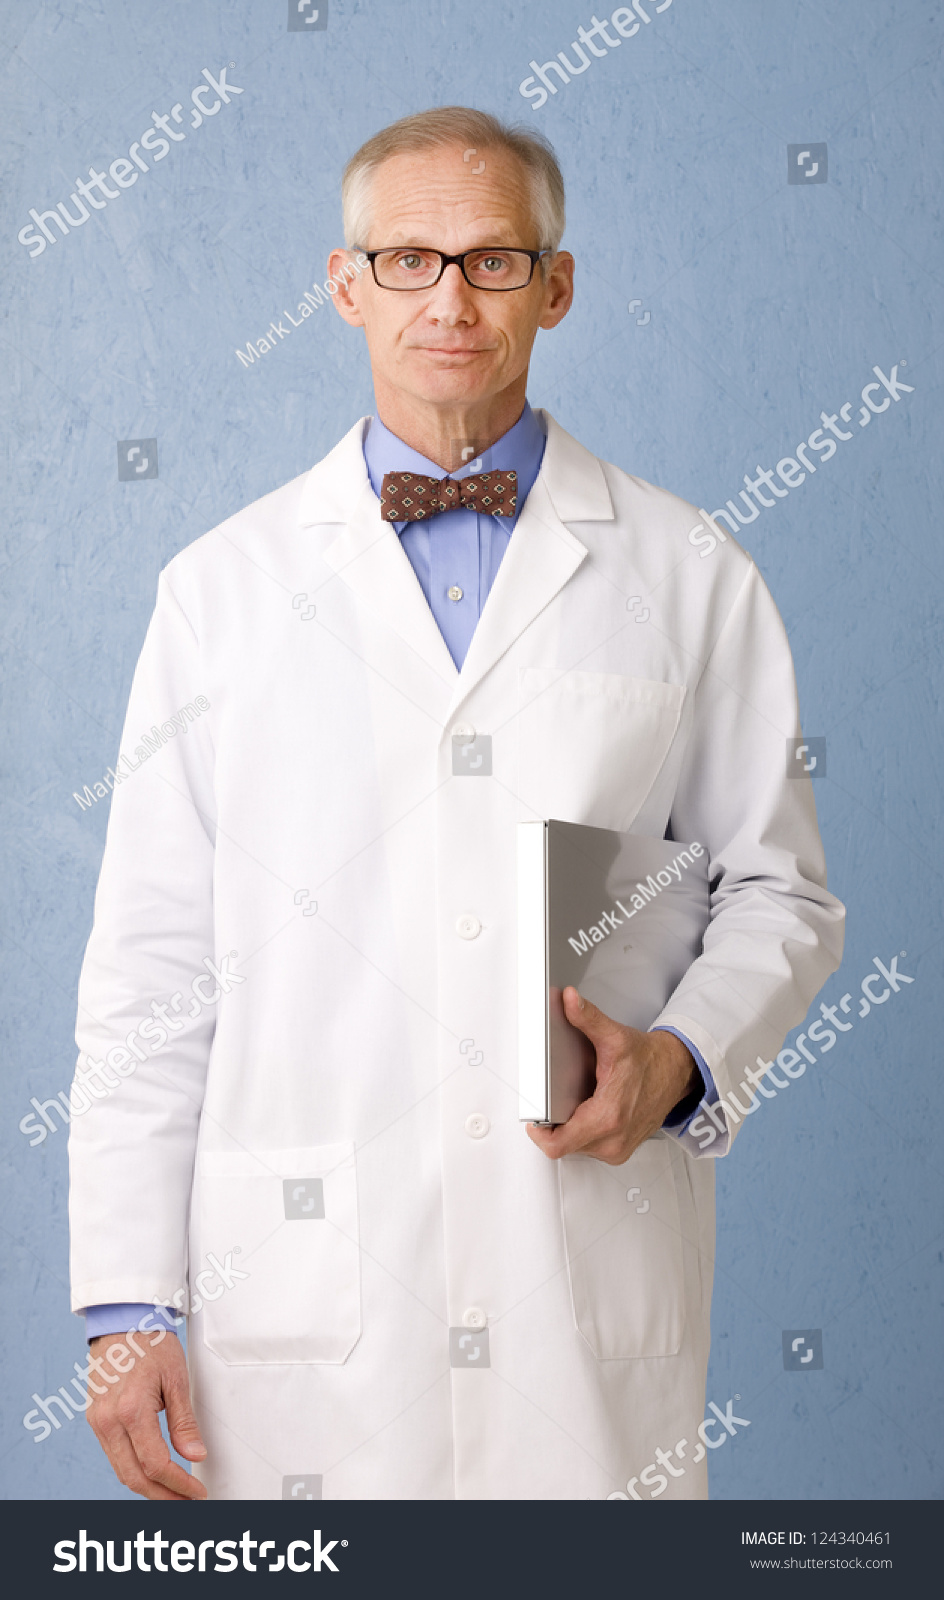 Health Care Professional Looking Camera Lab Stock Photo 124340461